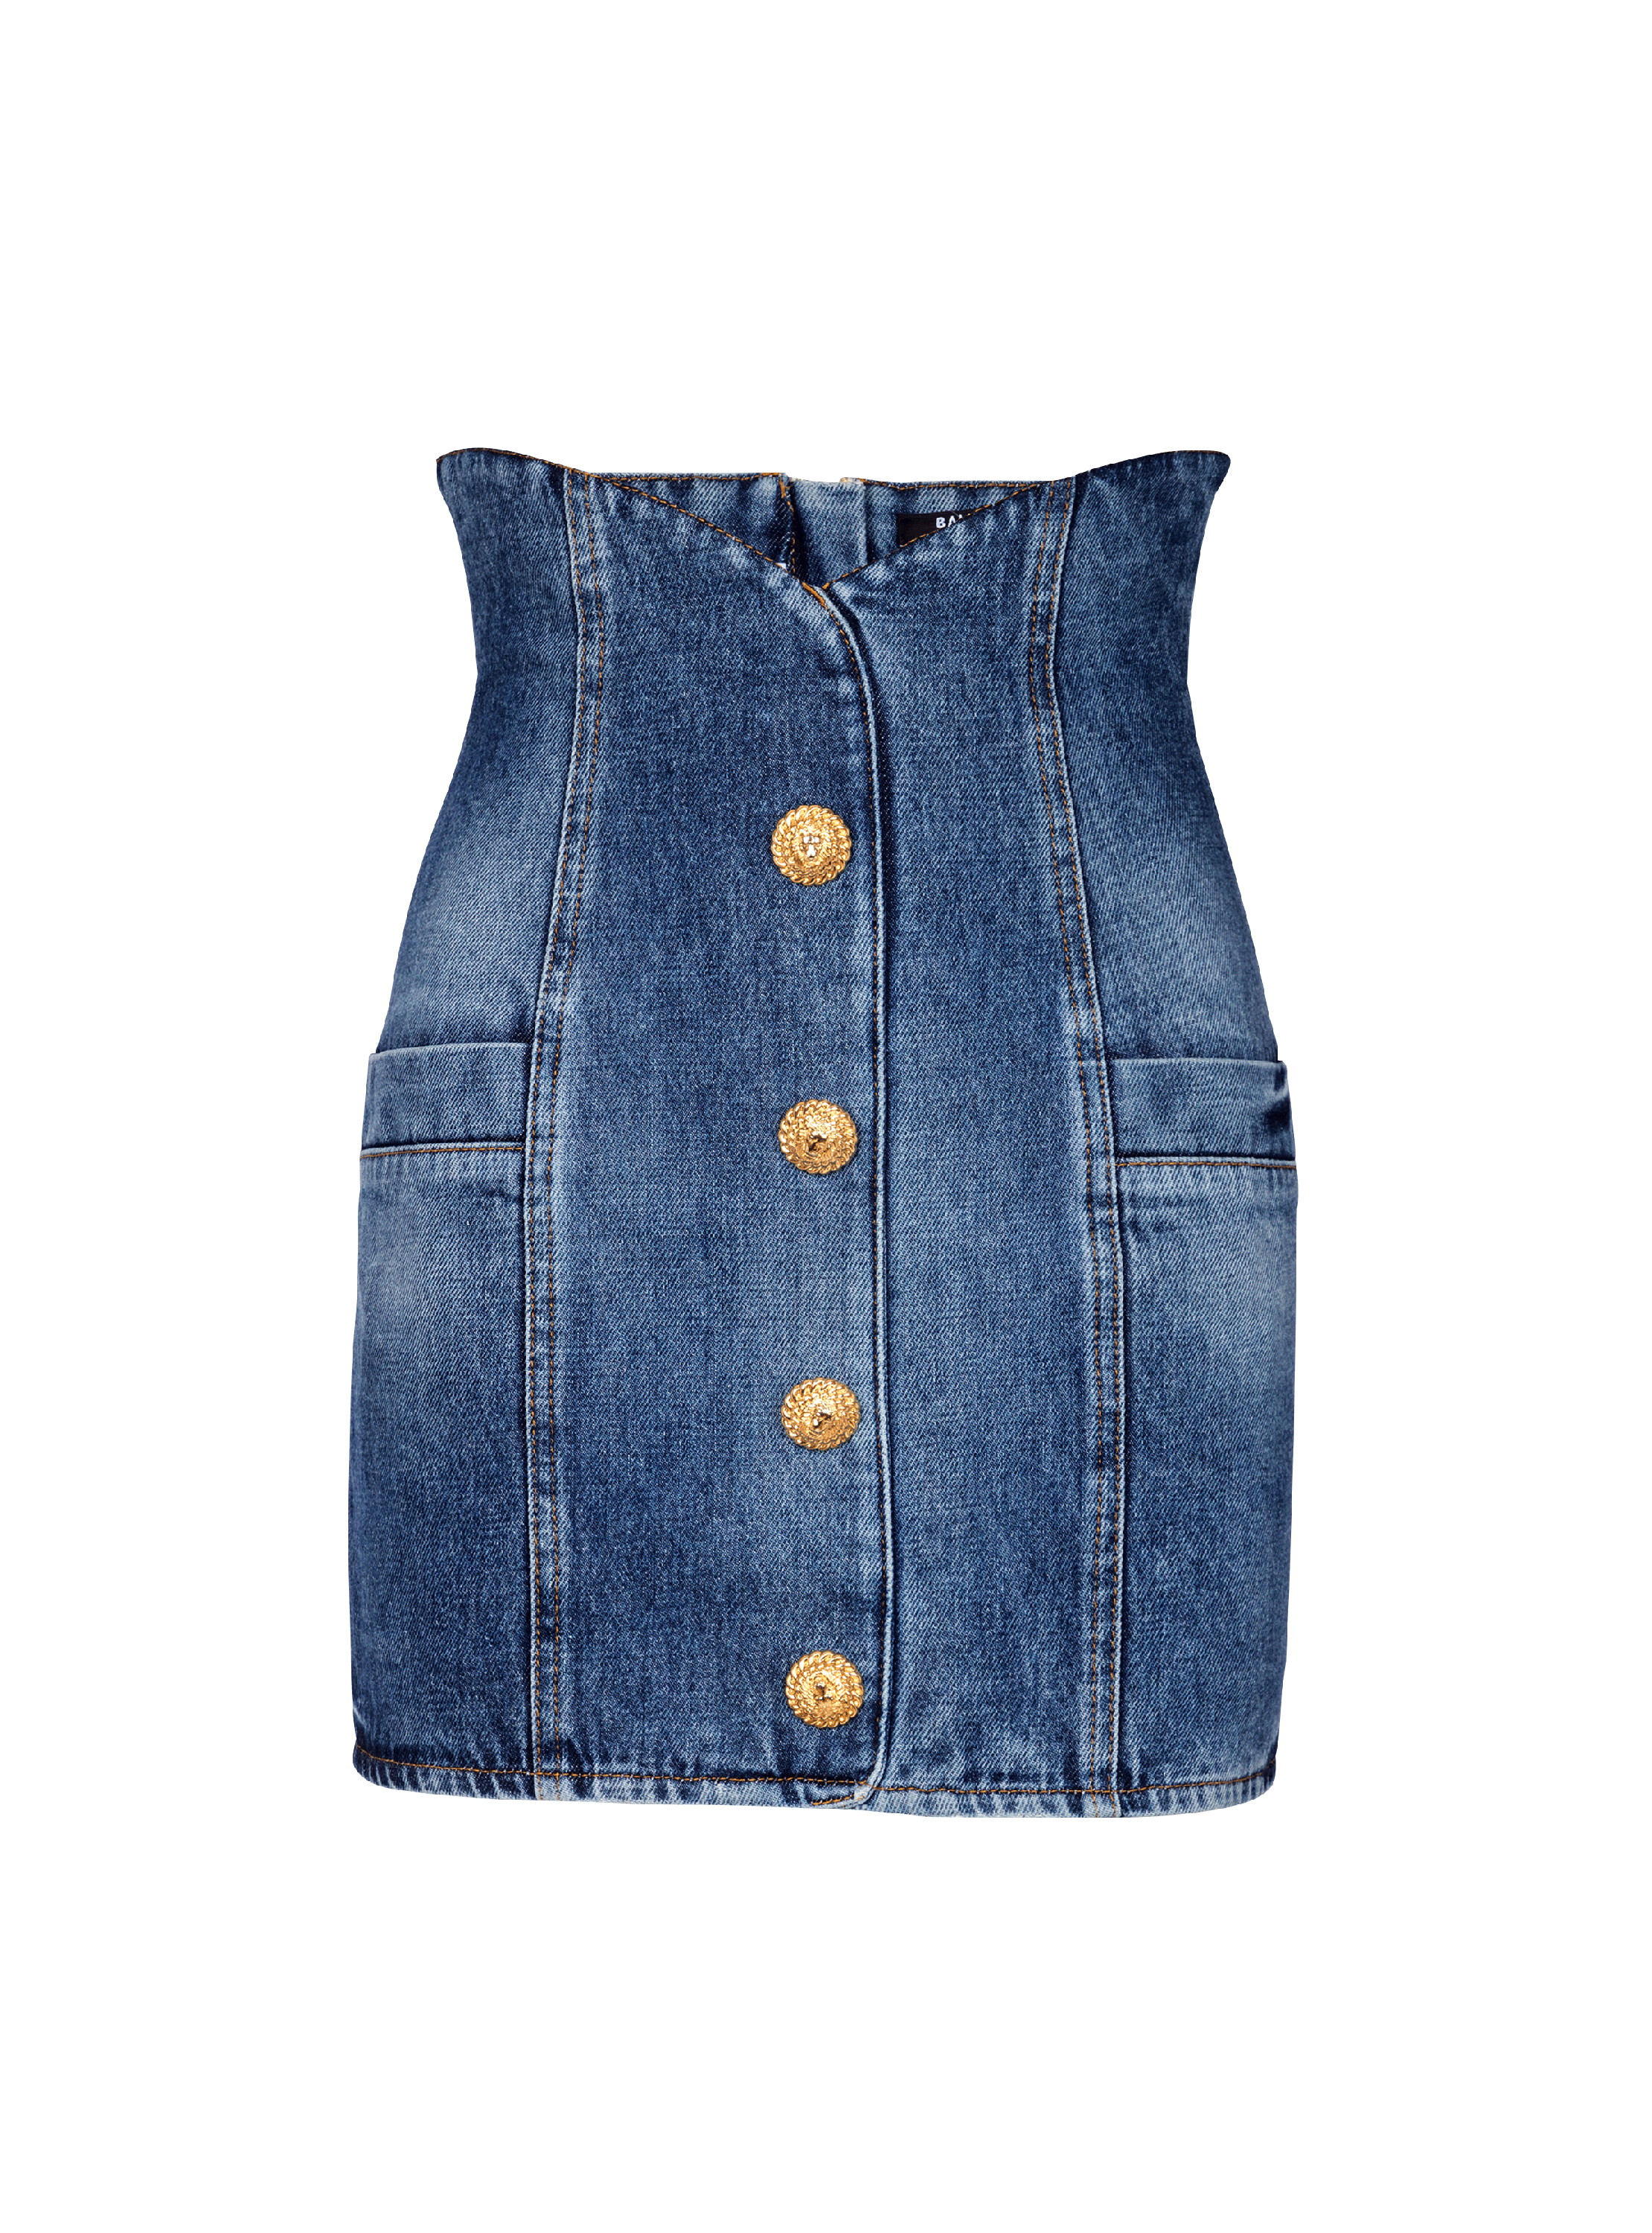 Denim tulip skirt with buttons, navy, hi-res